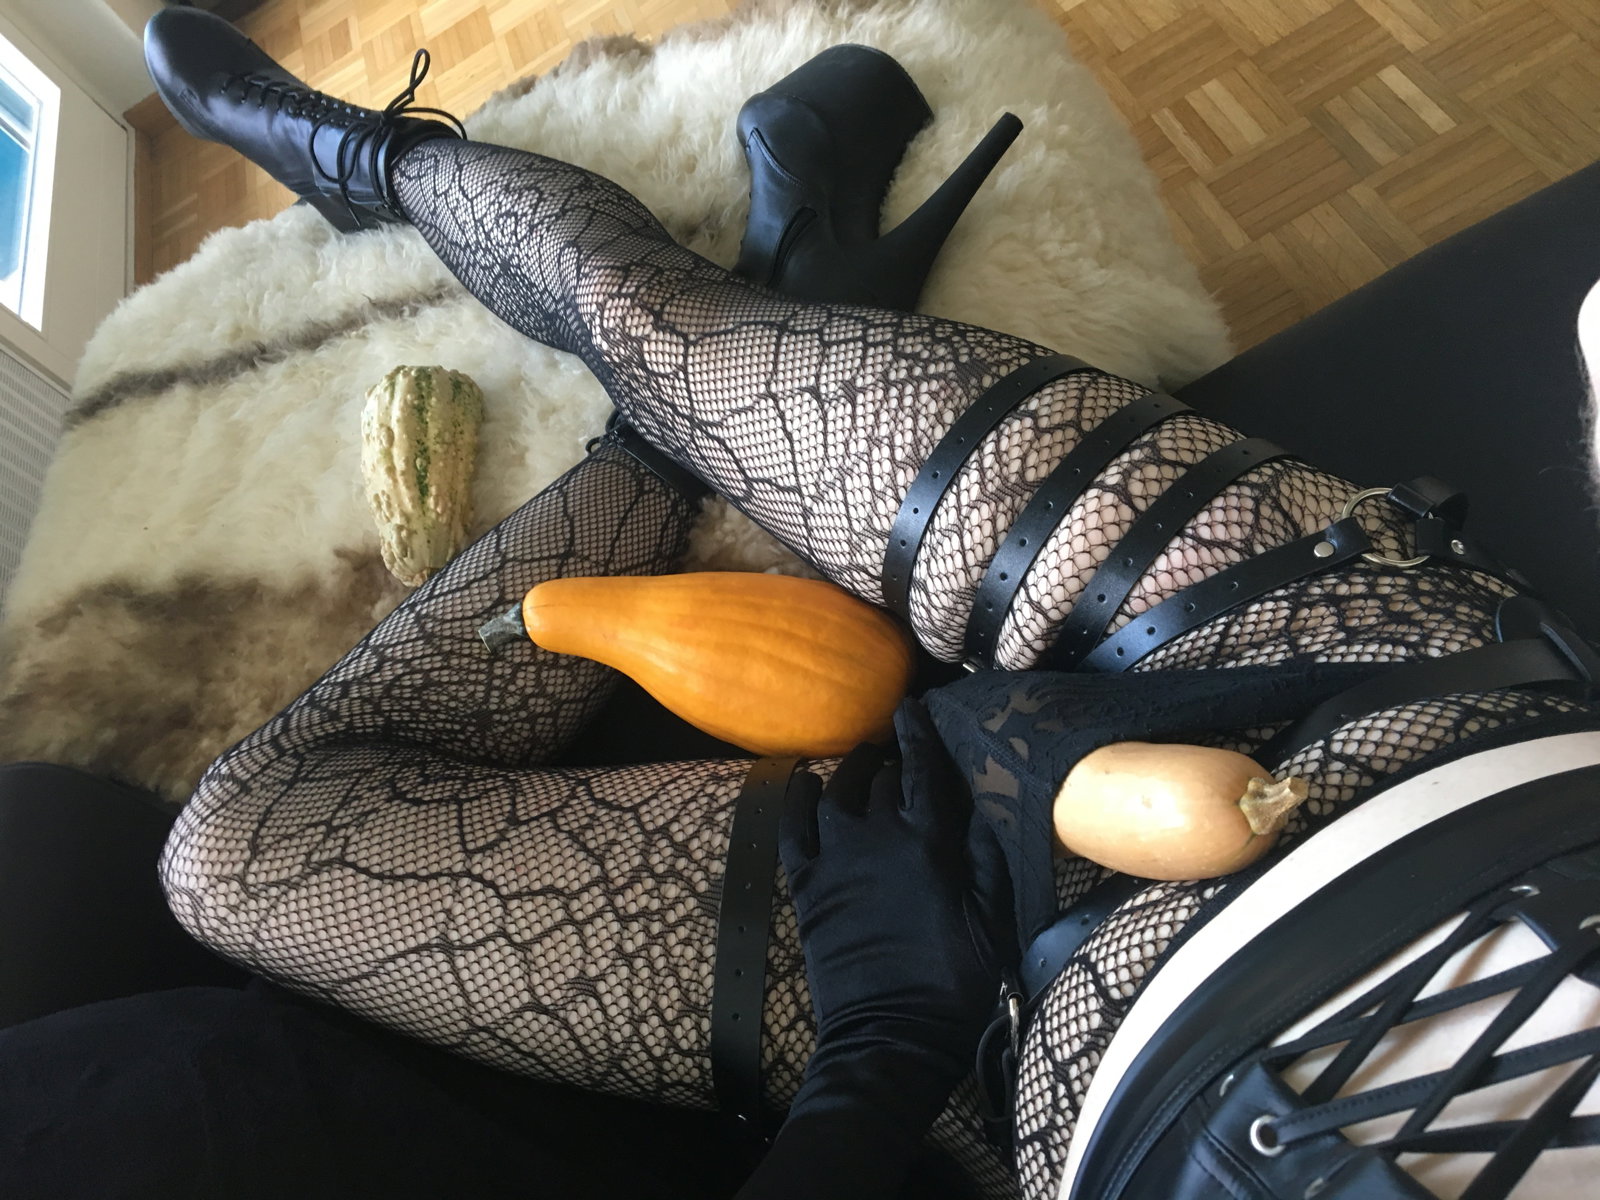 Photo by Ember with the username @EmberStorm, who is a verified user,  October 13, 2019 at 8:25 AM. The post is about the topic Sissy and the text says 'Those poor little things, they had no idea they would end up in my butt'